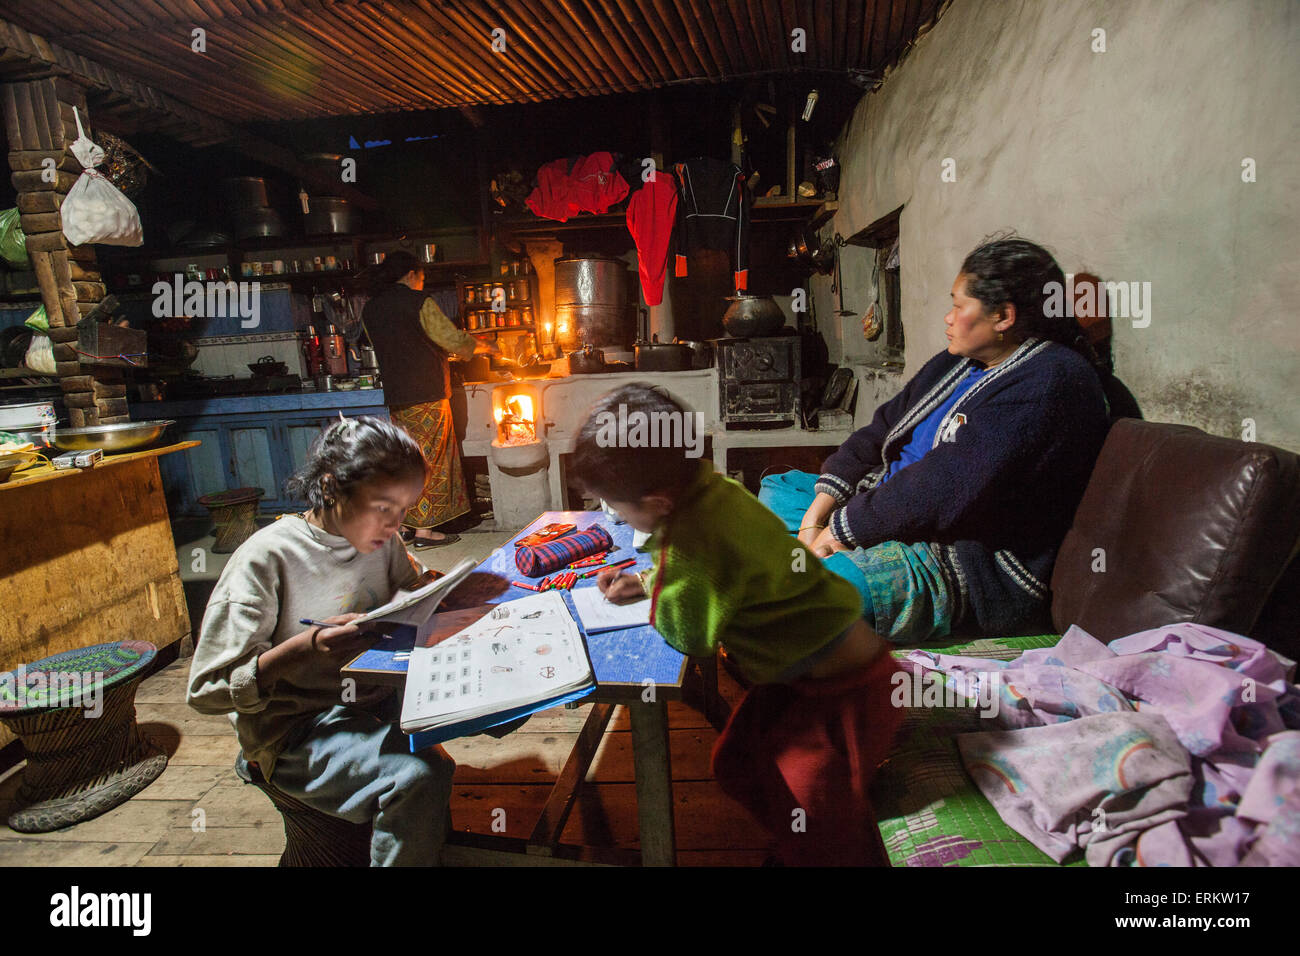 Interior of a Tumling house, where a family of the Gurung ethnicity lives at an altitude of 2900 meters, Ilam District, Nepal Stock Photo